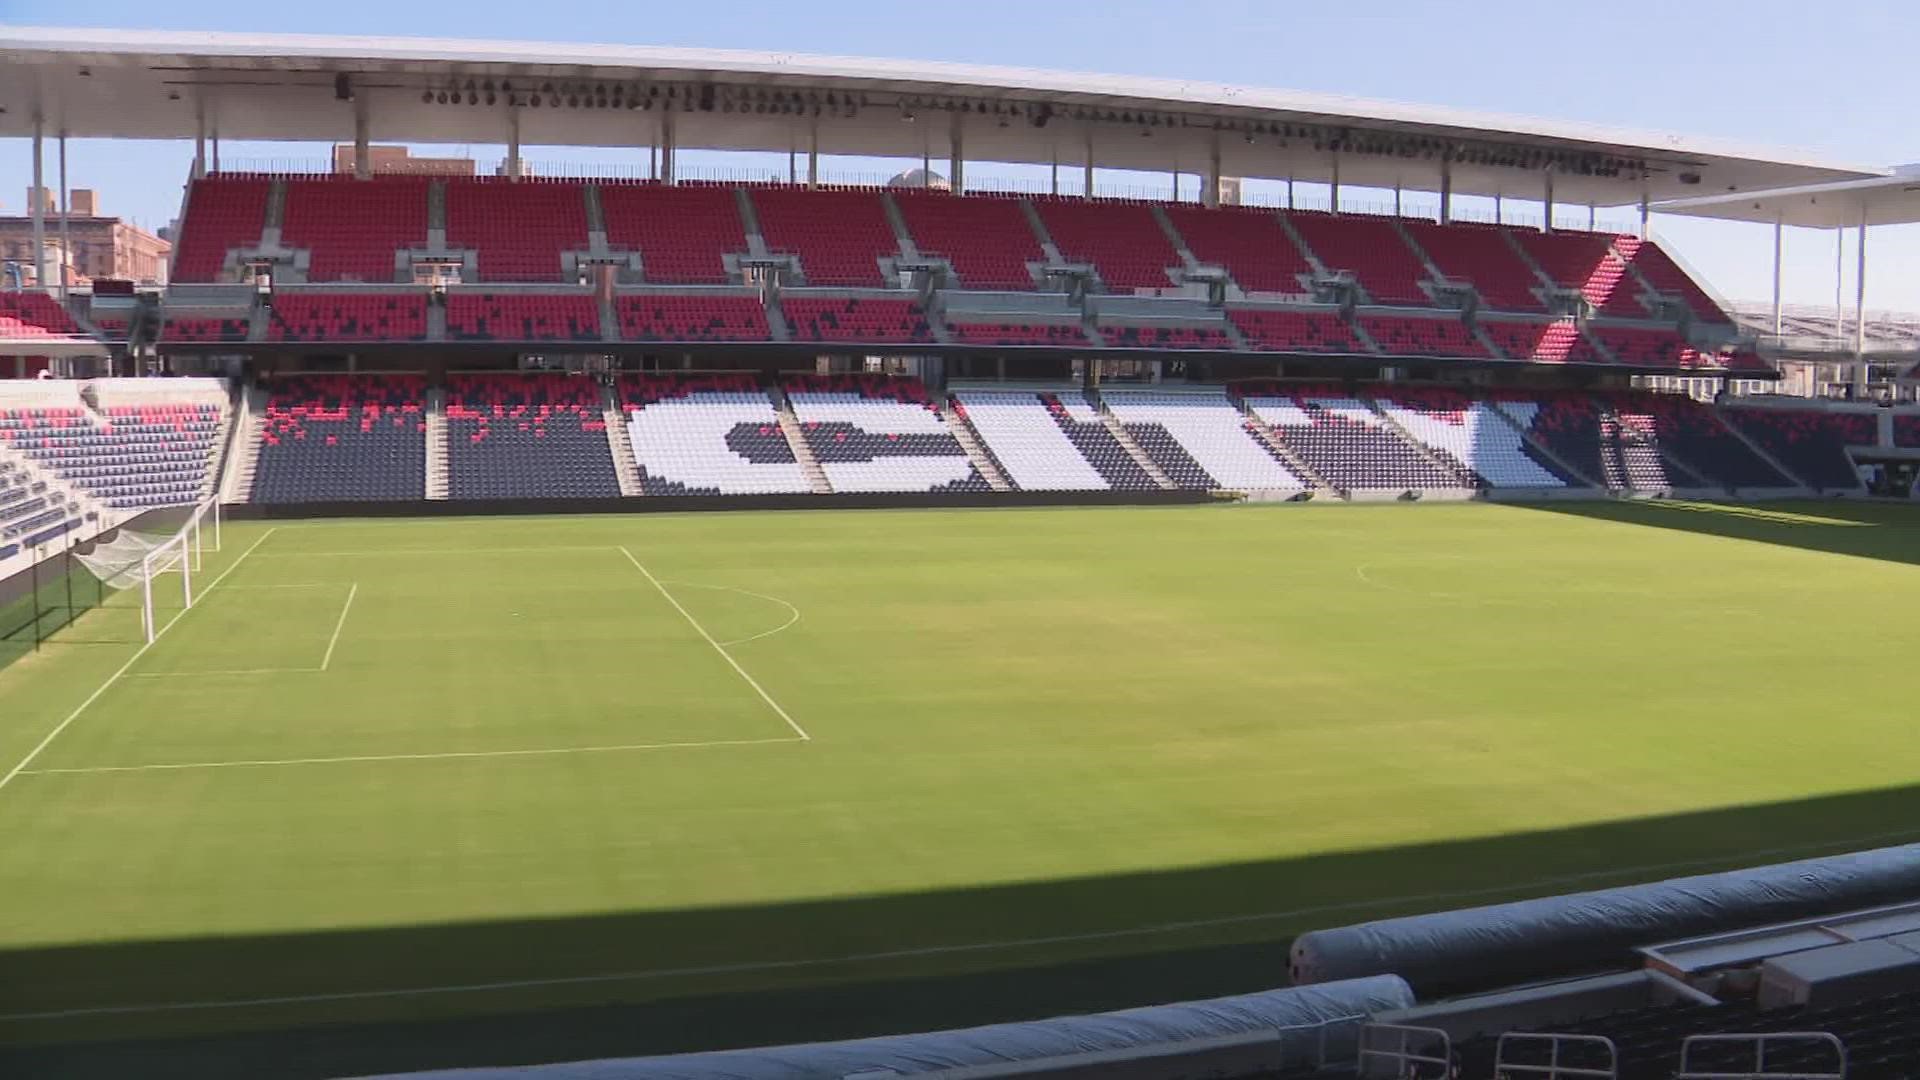 St. Louis CITY SC will preview its CITYPARK stadium this week, hosting one of Europe's top clubs. CITY2 will play Bayer 04 Leverkusen on Wednesday at 7 p.m.